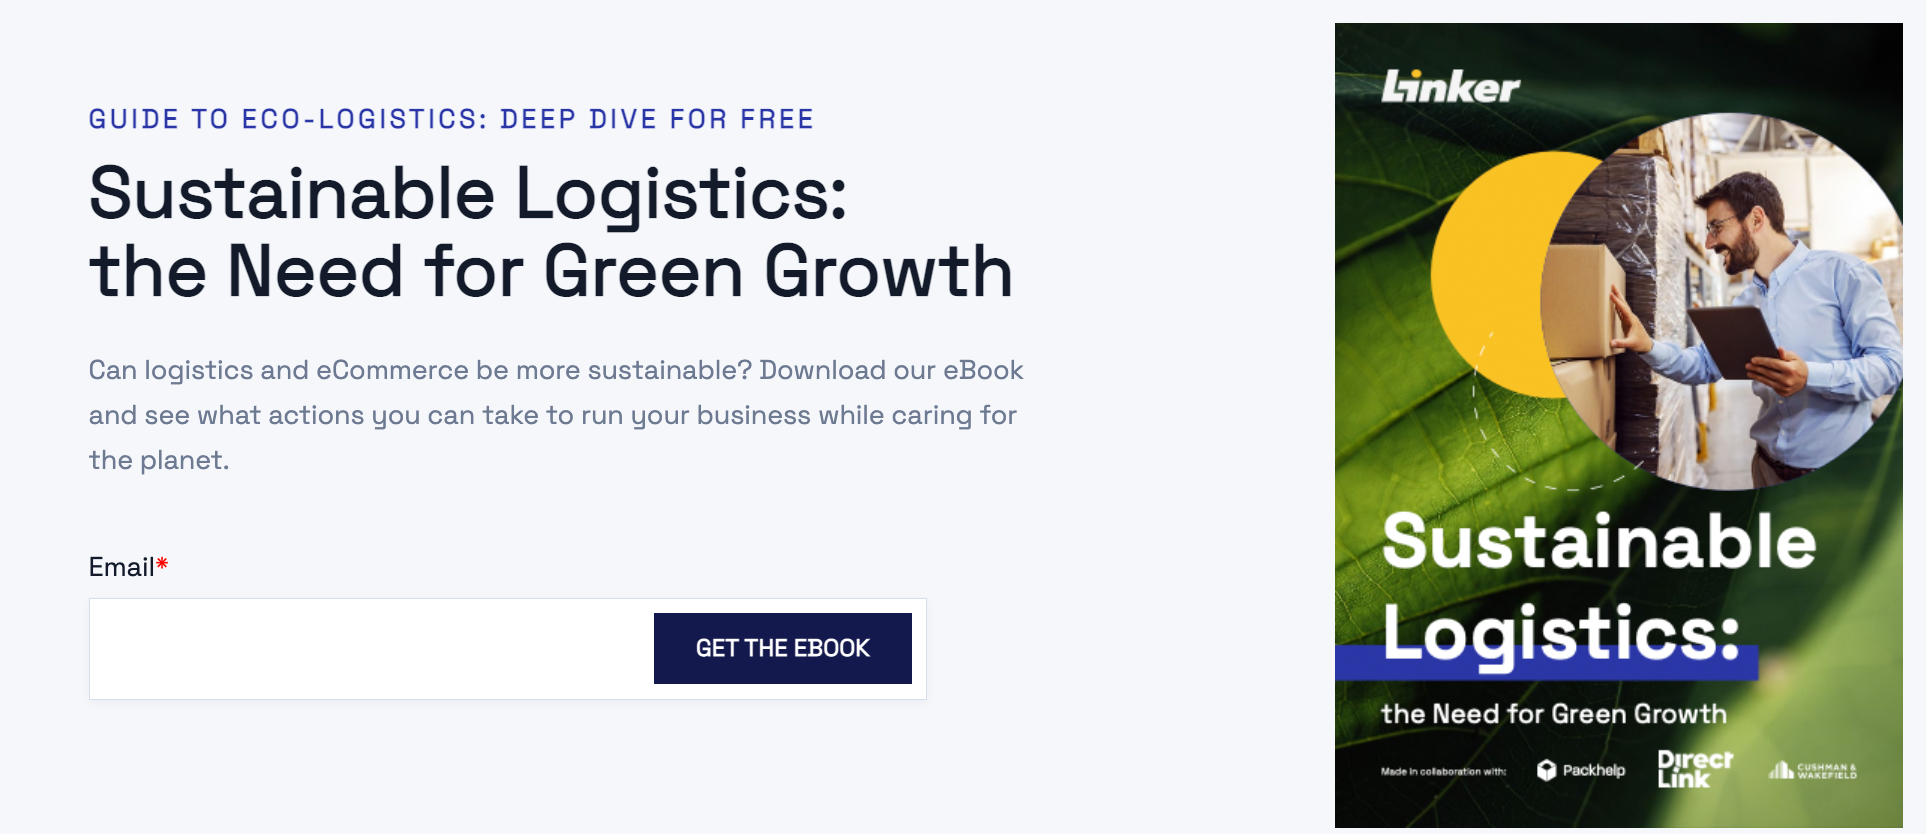 Linker Cloud: Sustainable logistics: the need for green growth